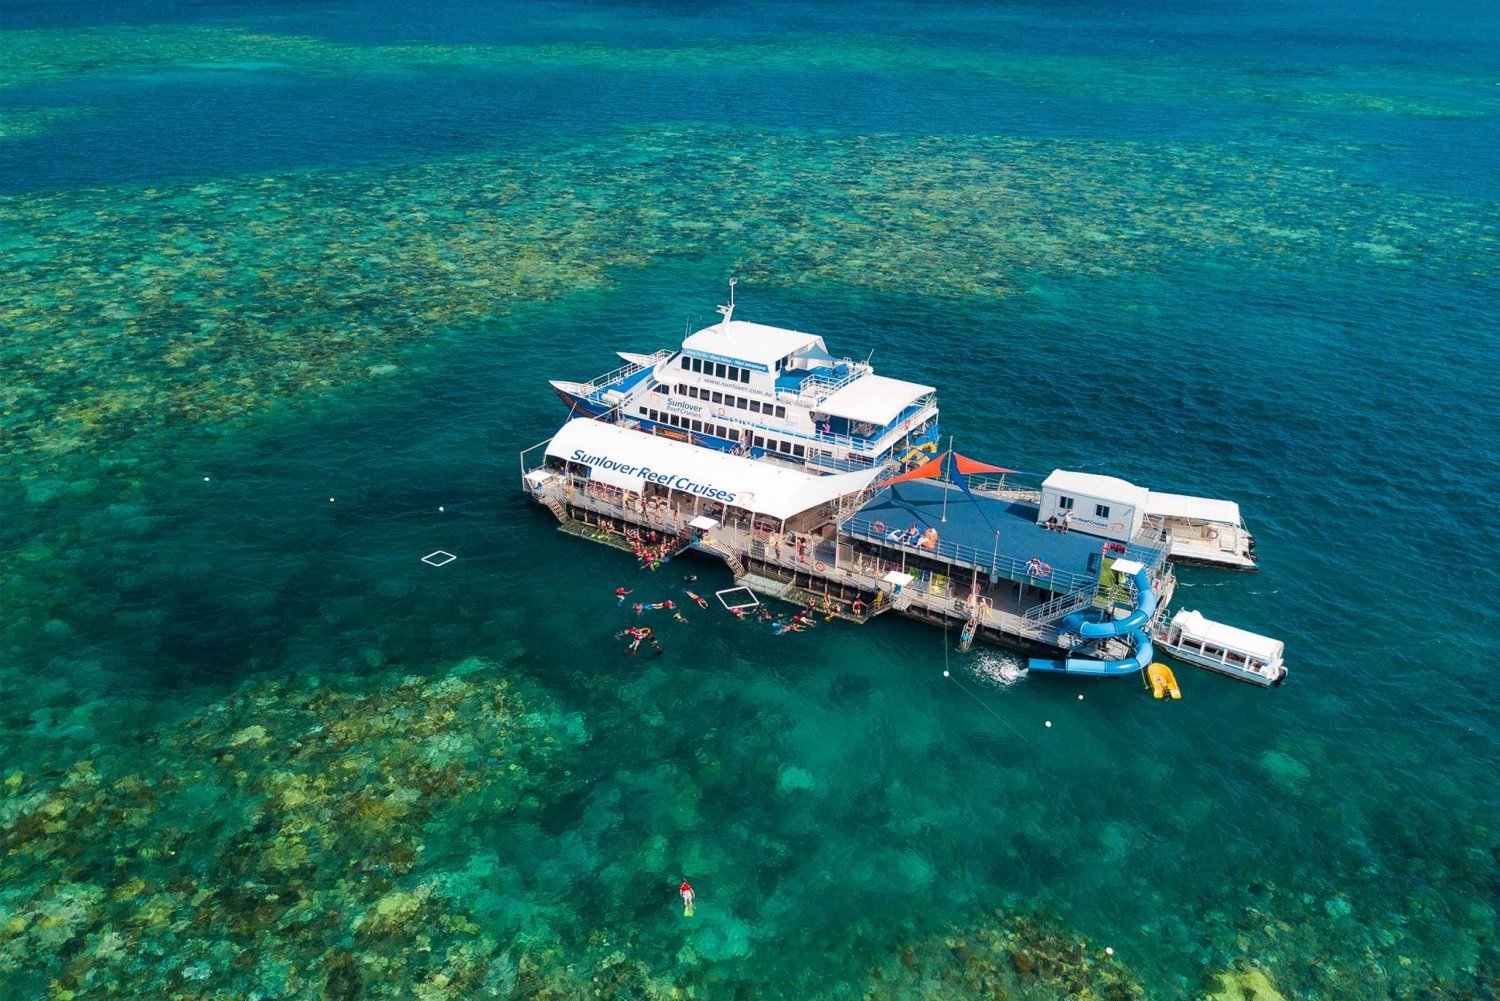 Cairns: Outer Great Barrier Reef Pontoon with Activities